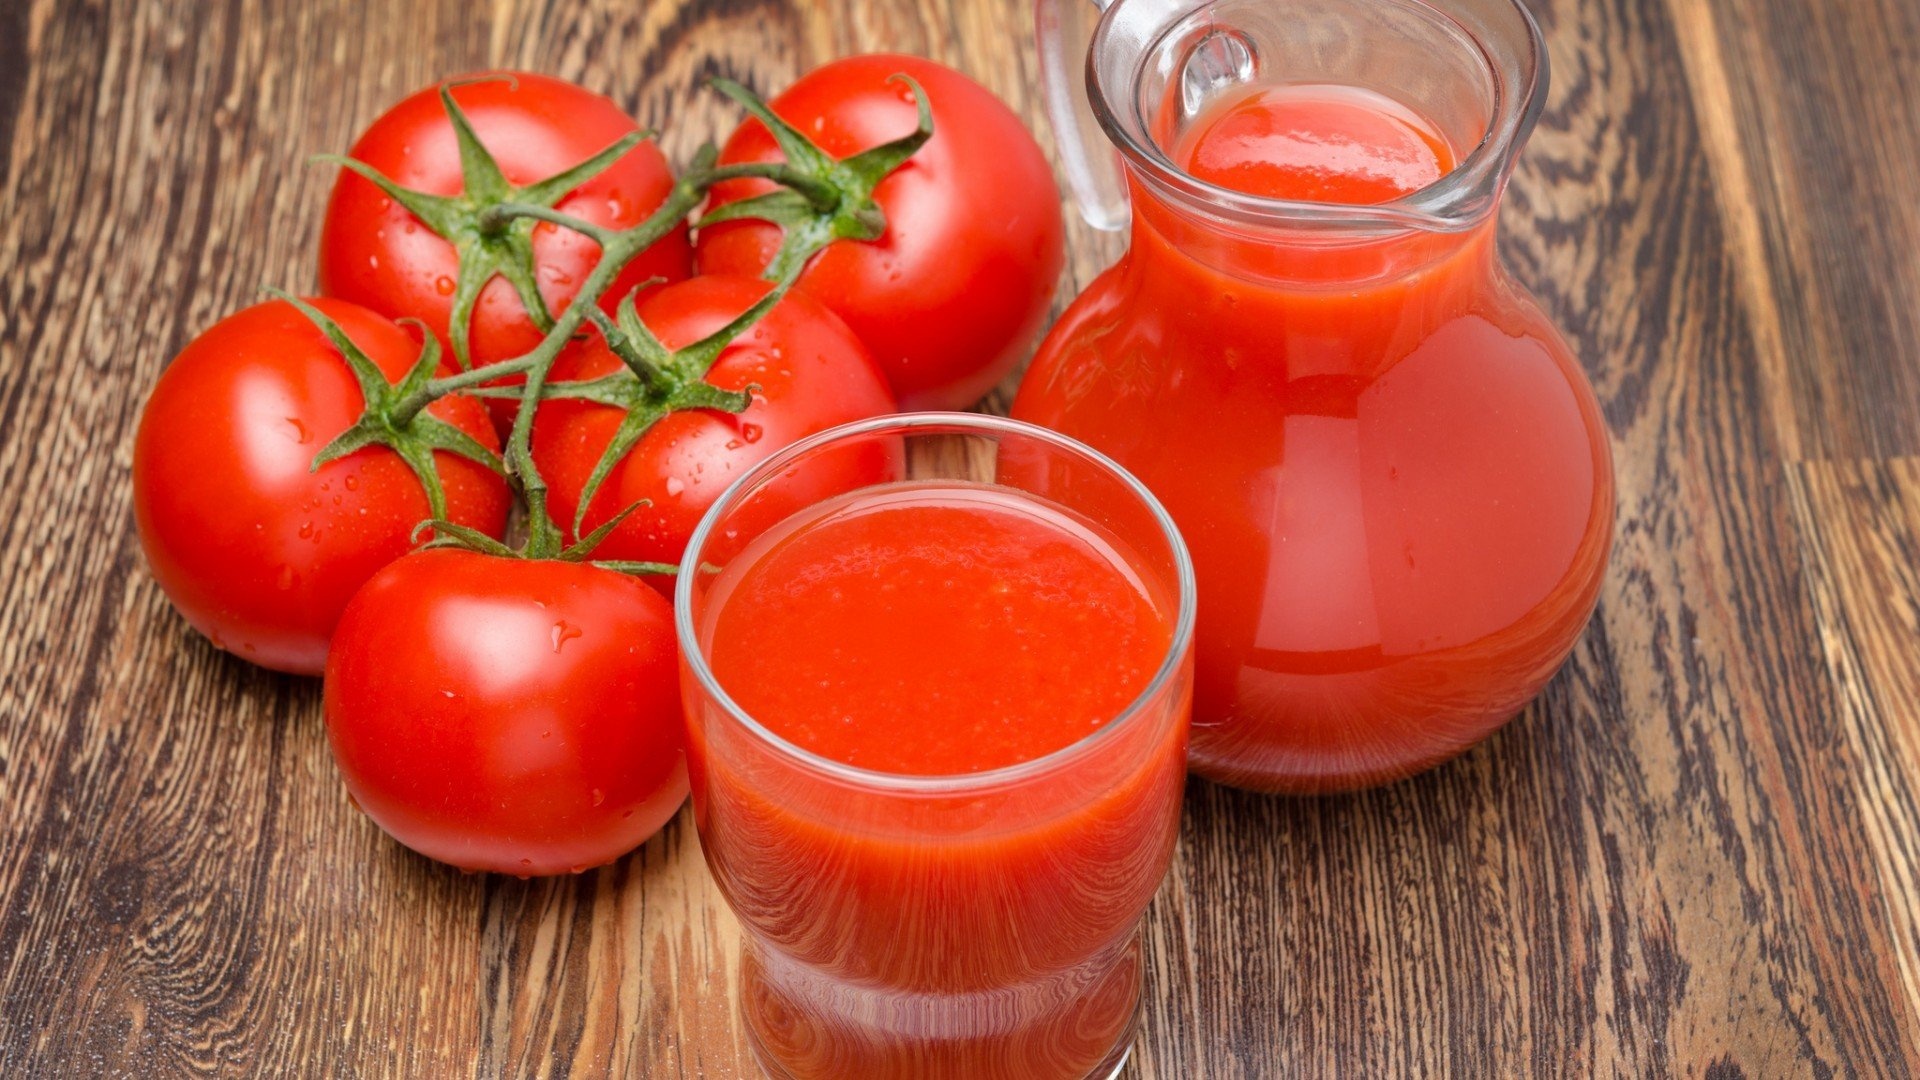 Tomato juice, Table setting, Food photography, Desktop and mobile wallpapers, 1920x1080 Full HD Desktop